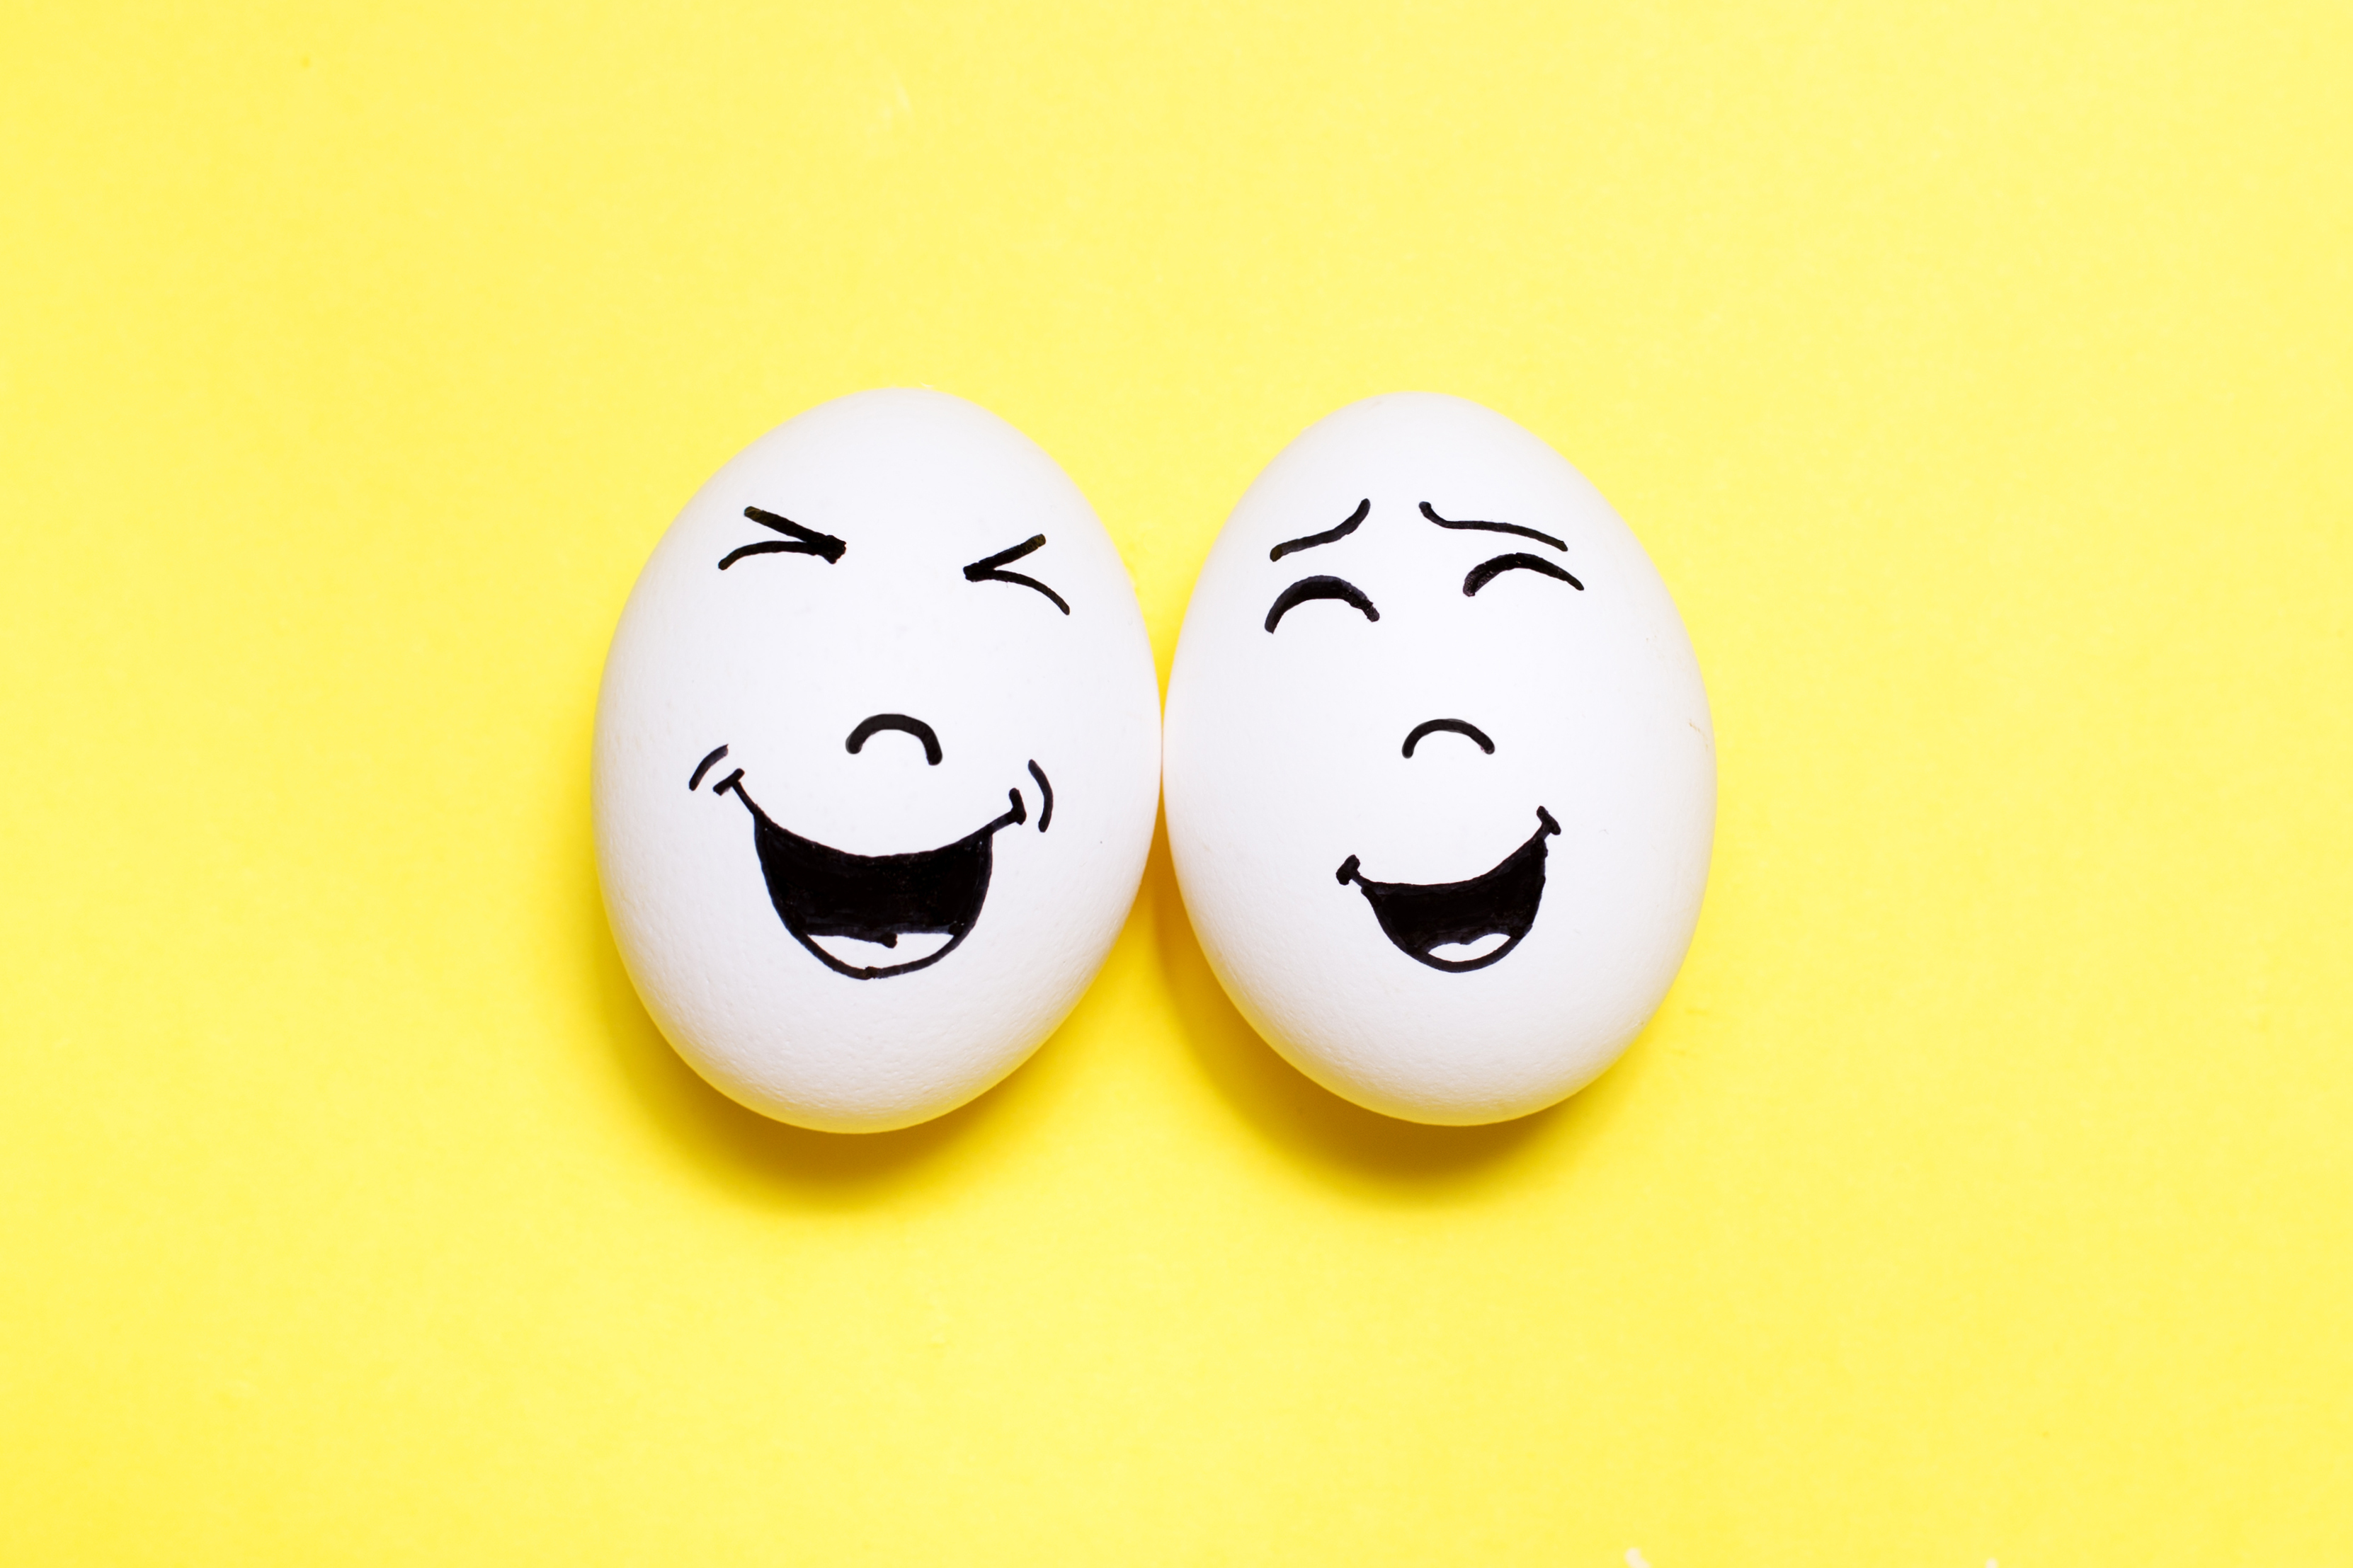 two eggs with faces drawn on them